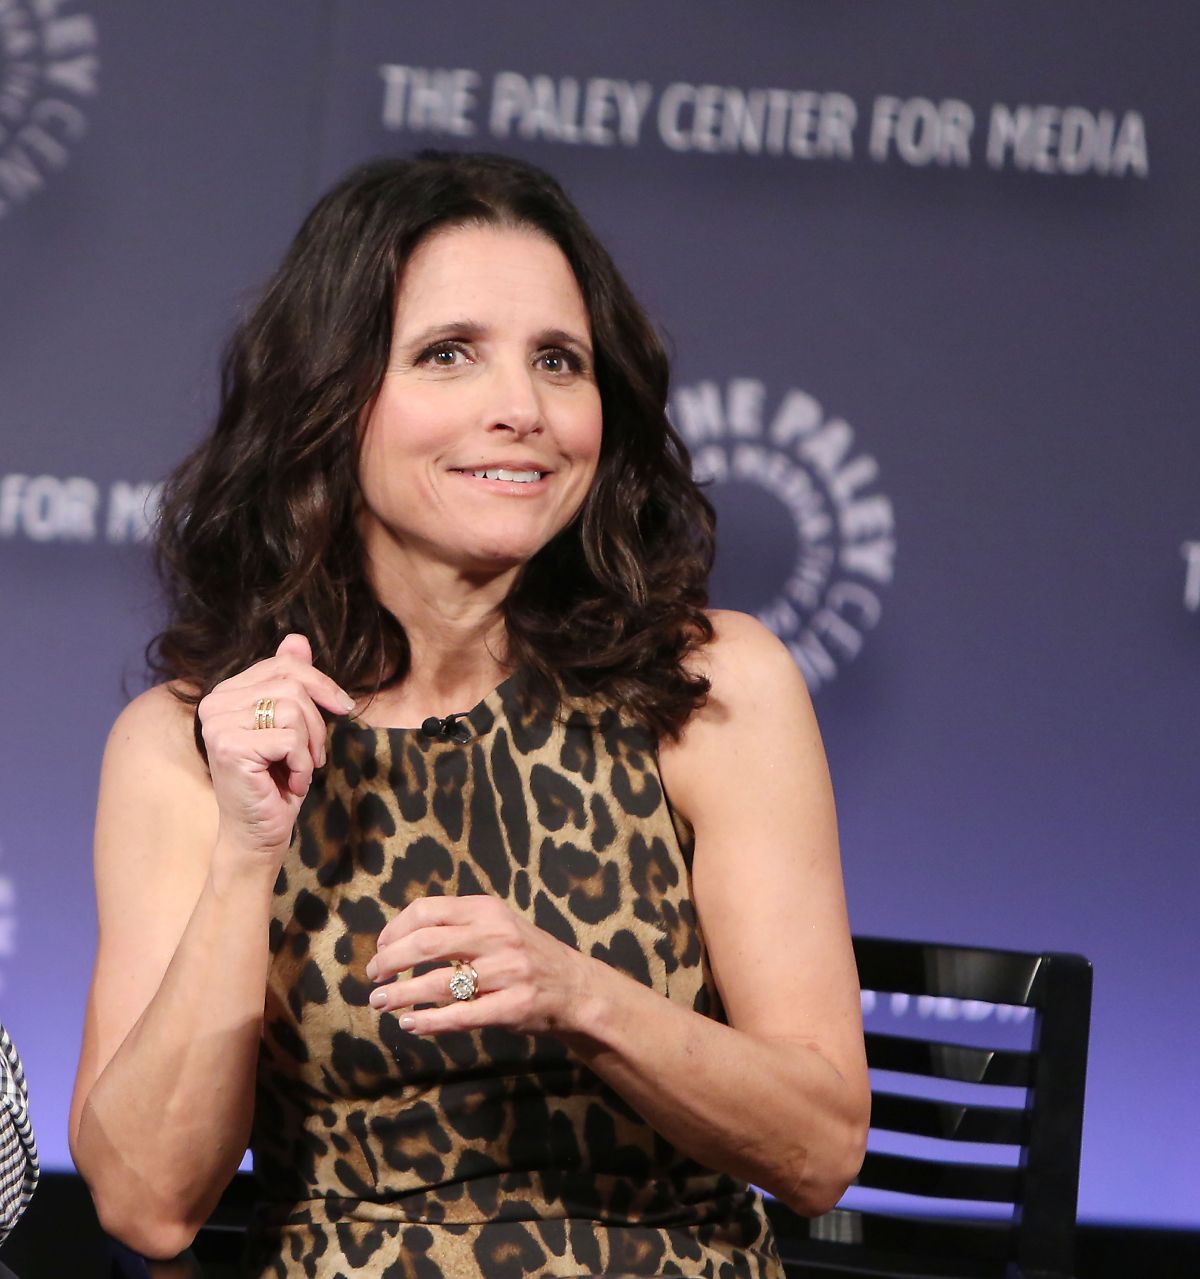 JULIA LOUIS-DREYFUS at Paley Center Hosts an Evening with Veep in New York.